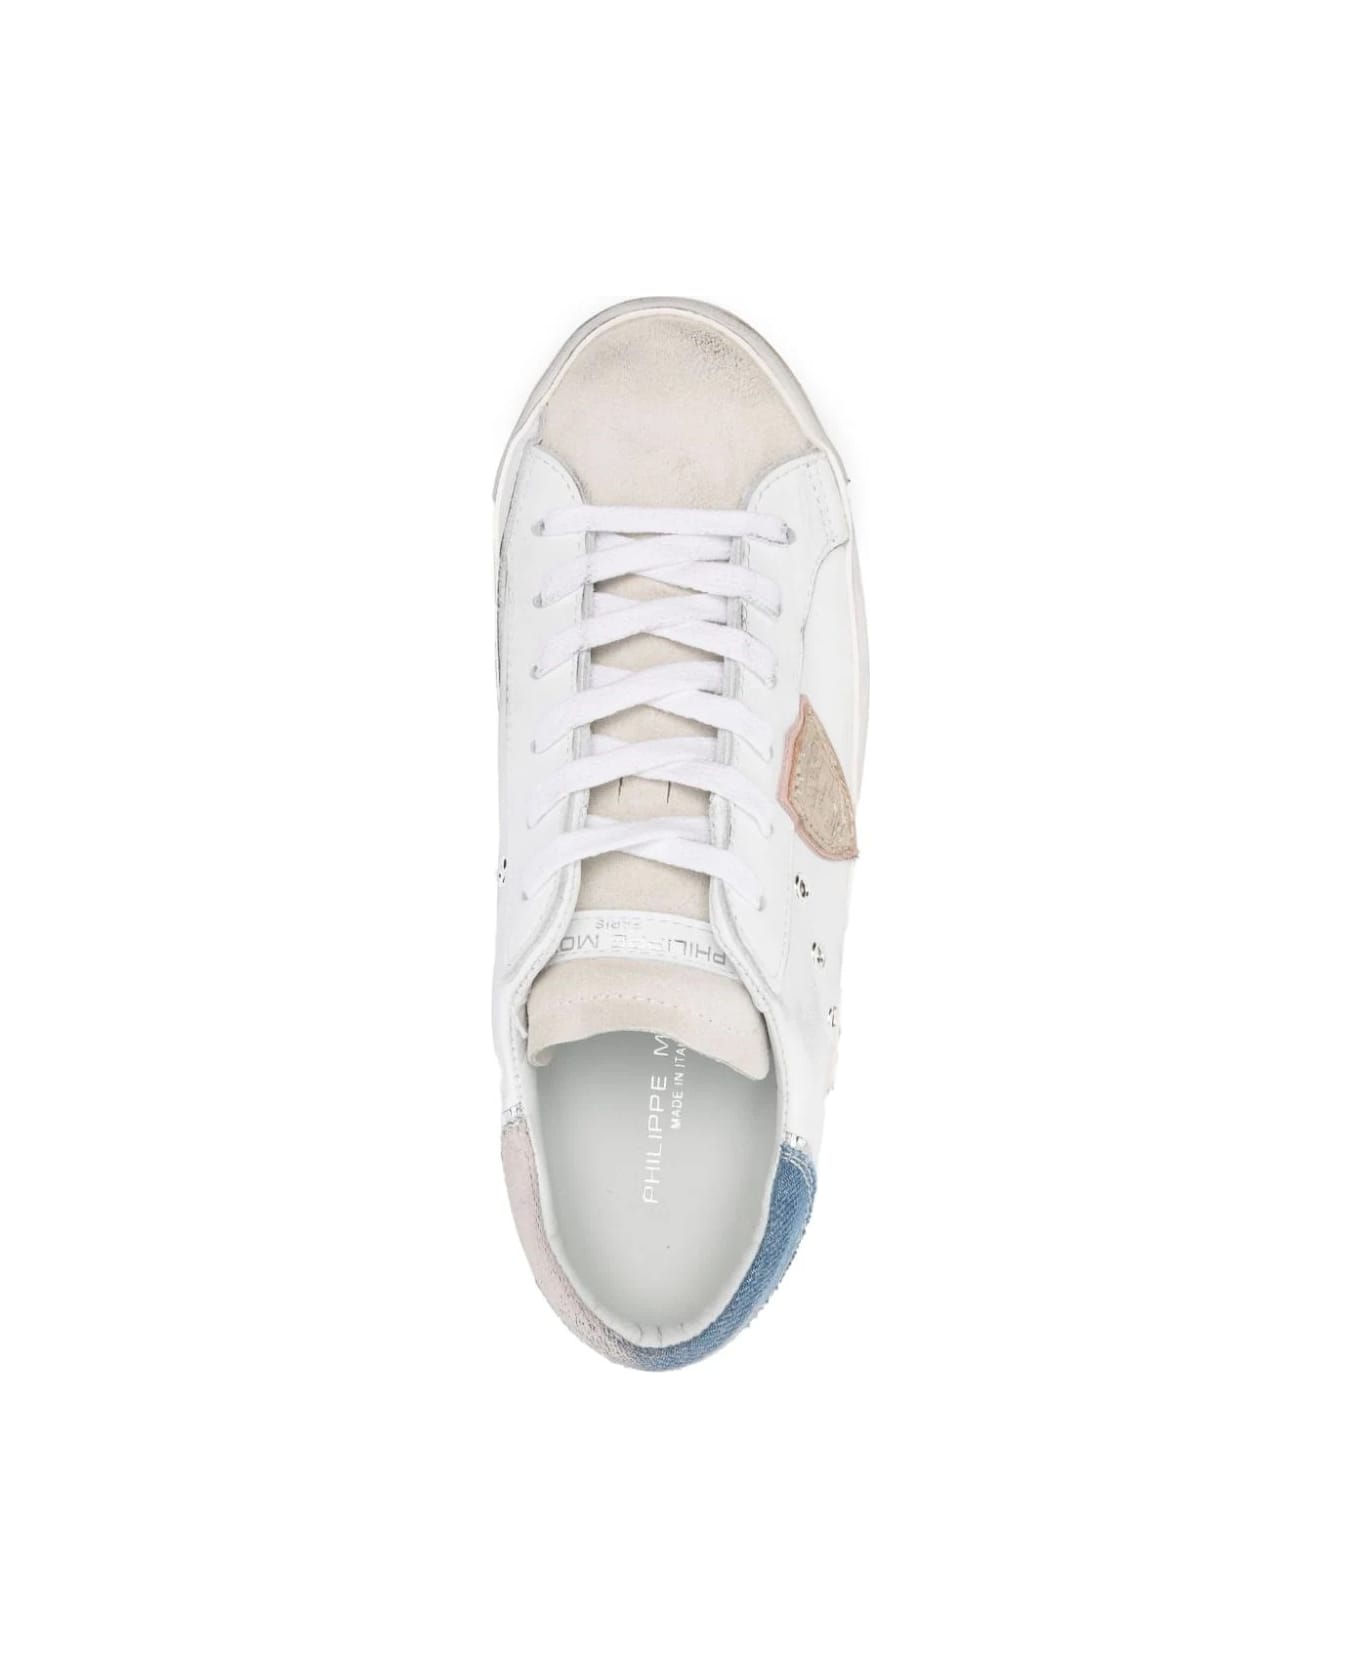 Philippe Model Prsx Low Sneakers - White And Light Blue - Blanc Azuk